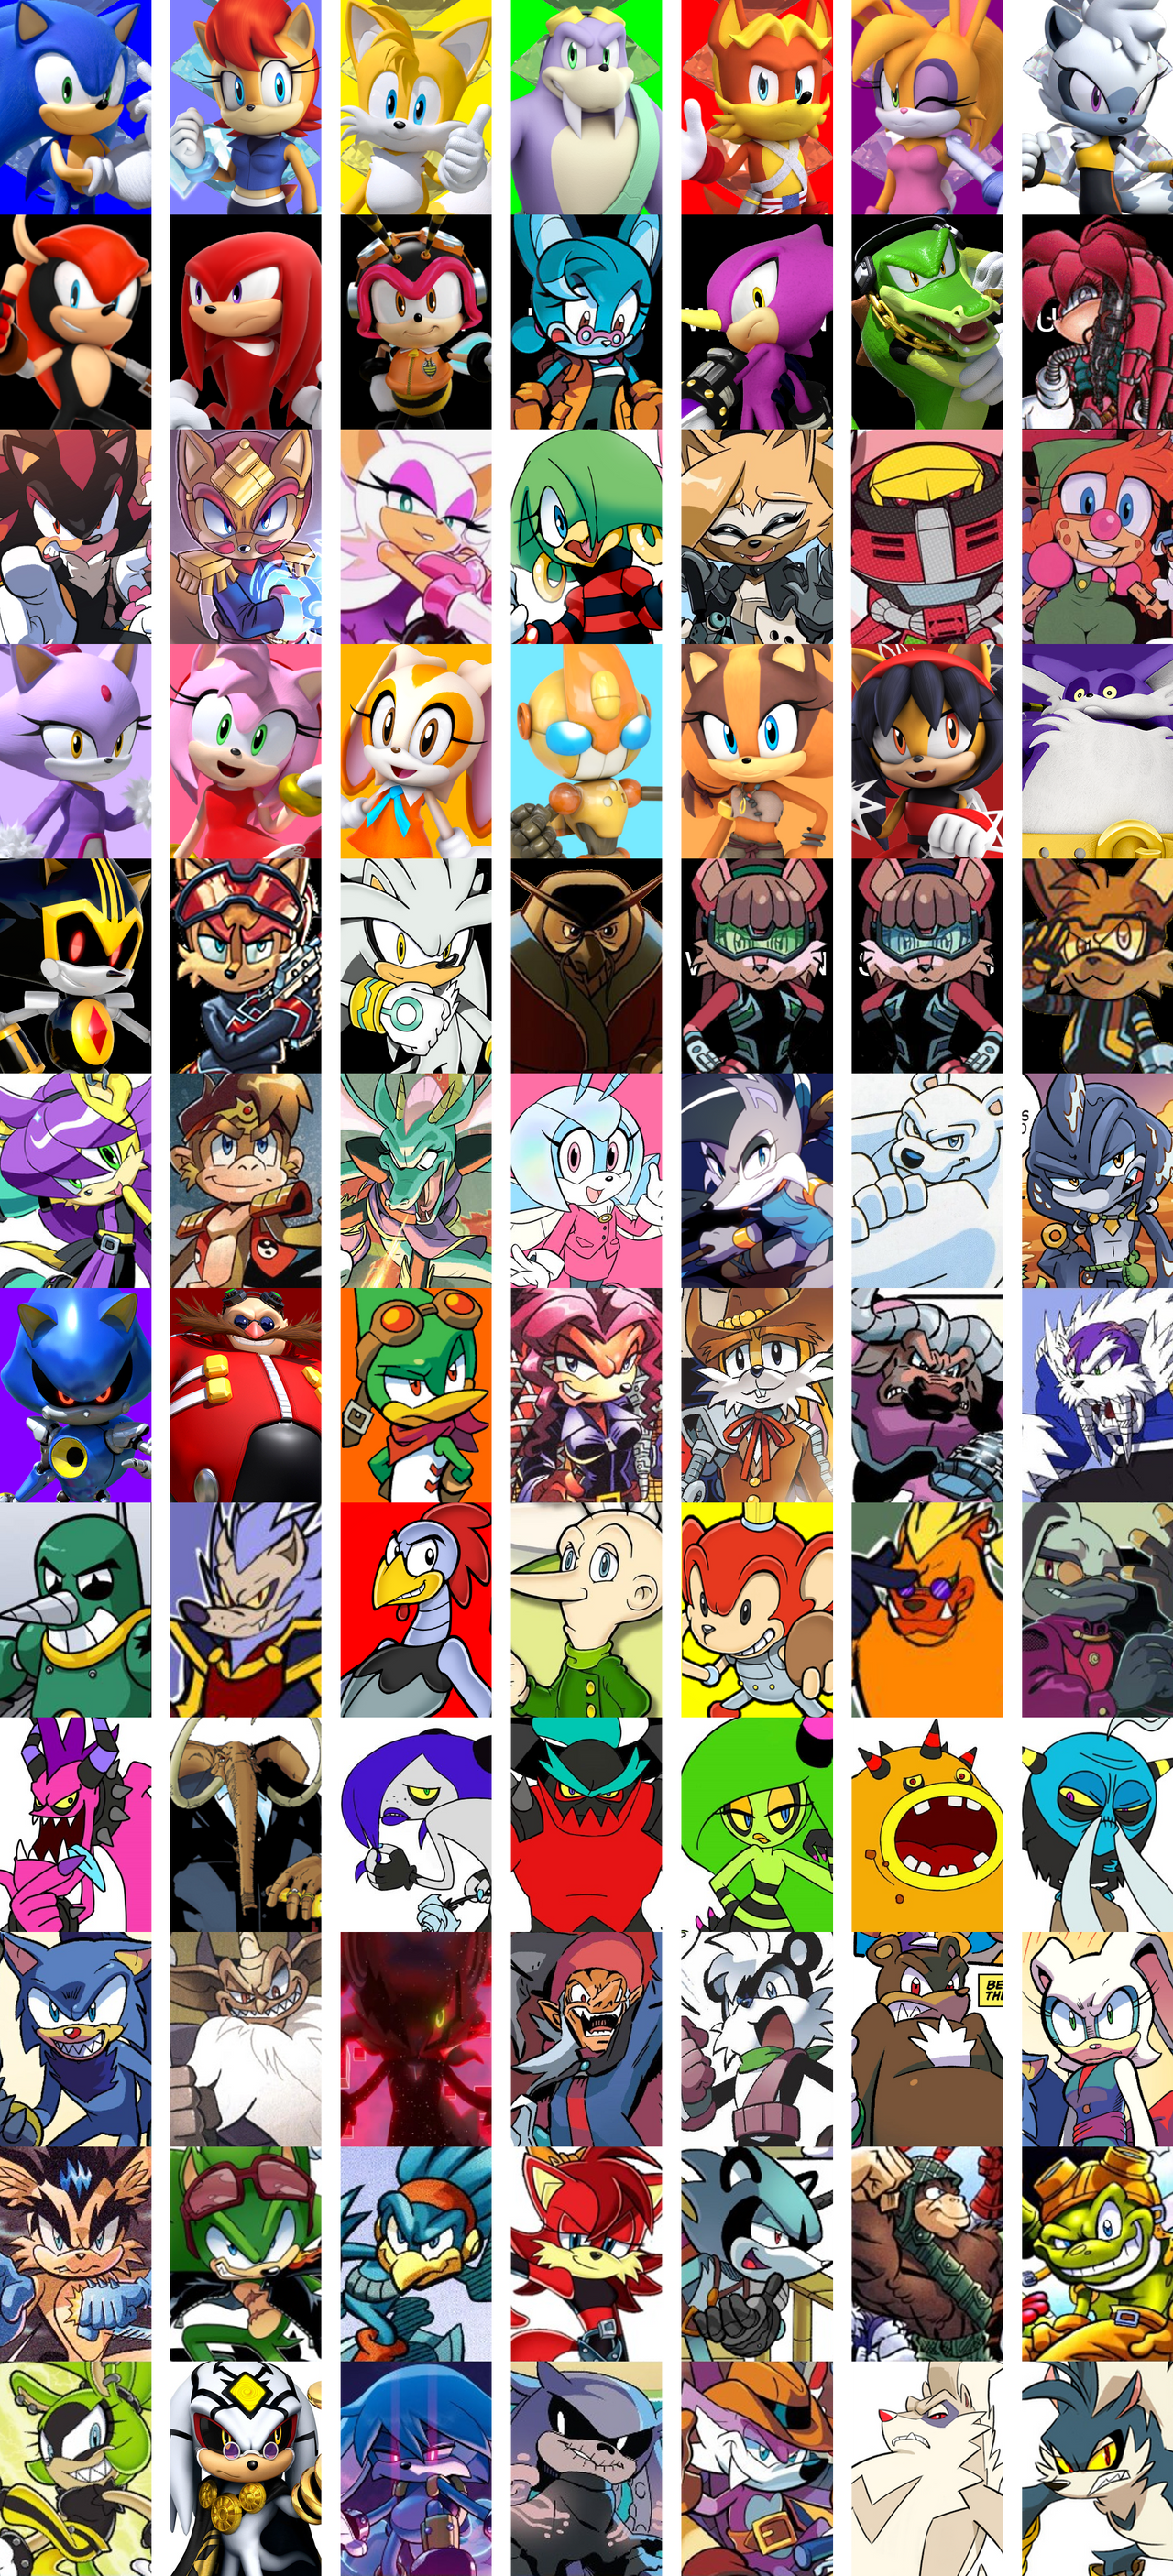 My Top 15 Sonic Characters I was OK With by 4xEyes1987 on DeviantArt